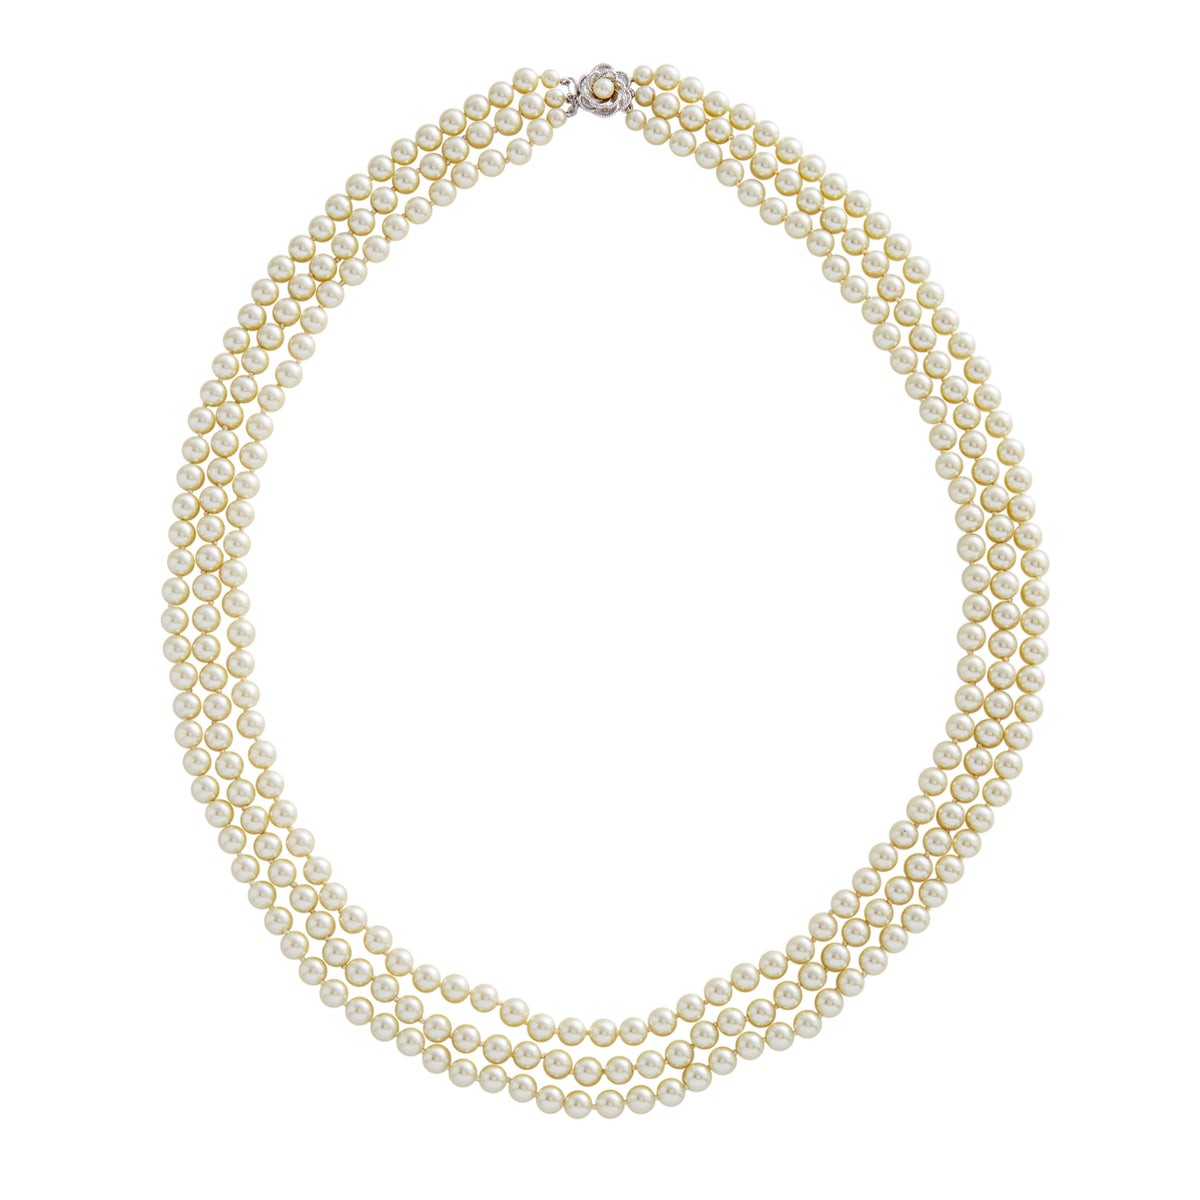 First Lady Jacqueline Kennedy's Three-stranded pearl necklace – White House  Historical Association